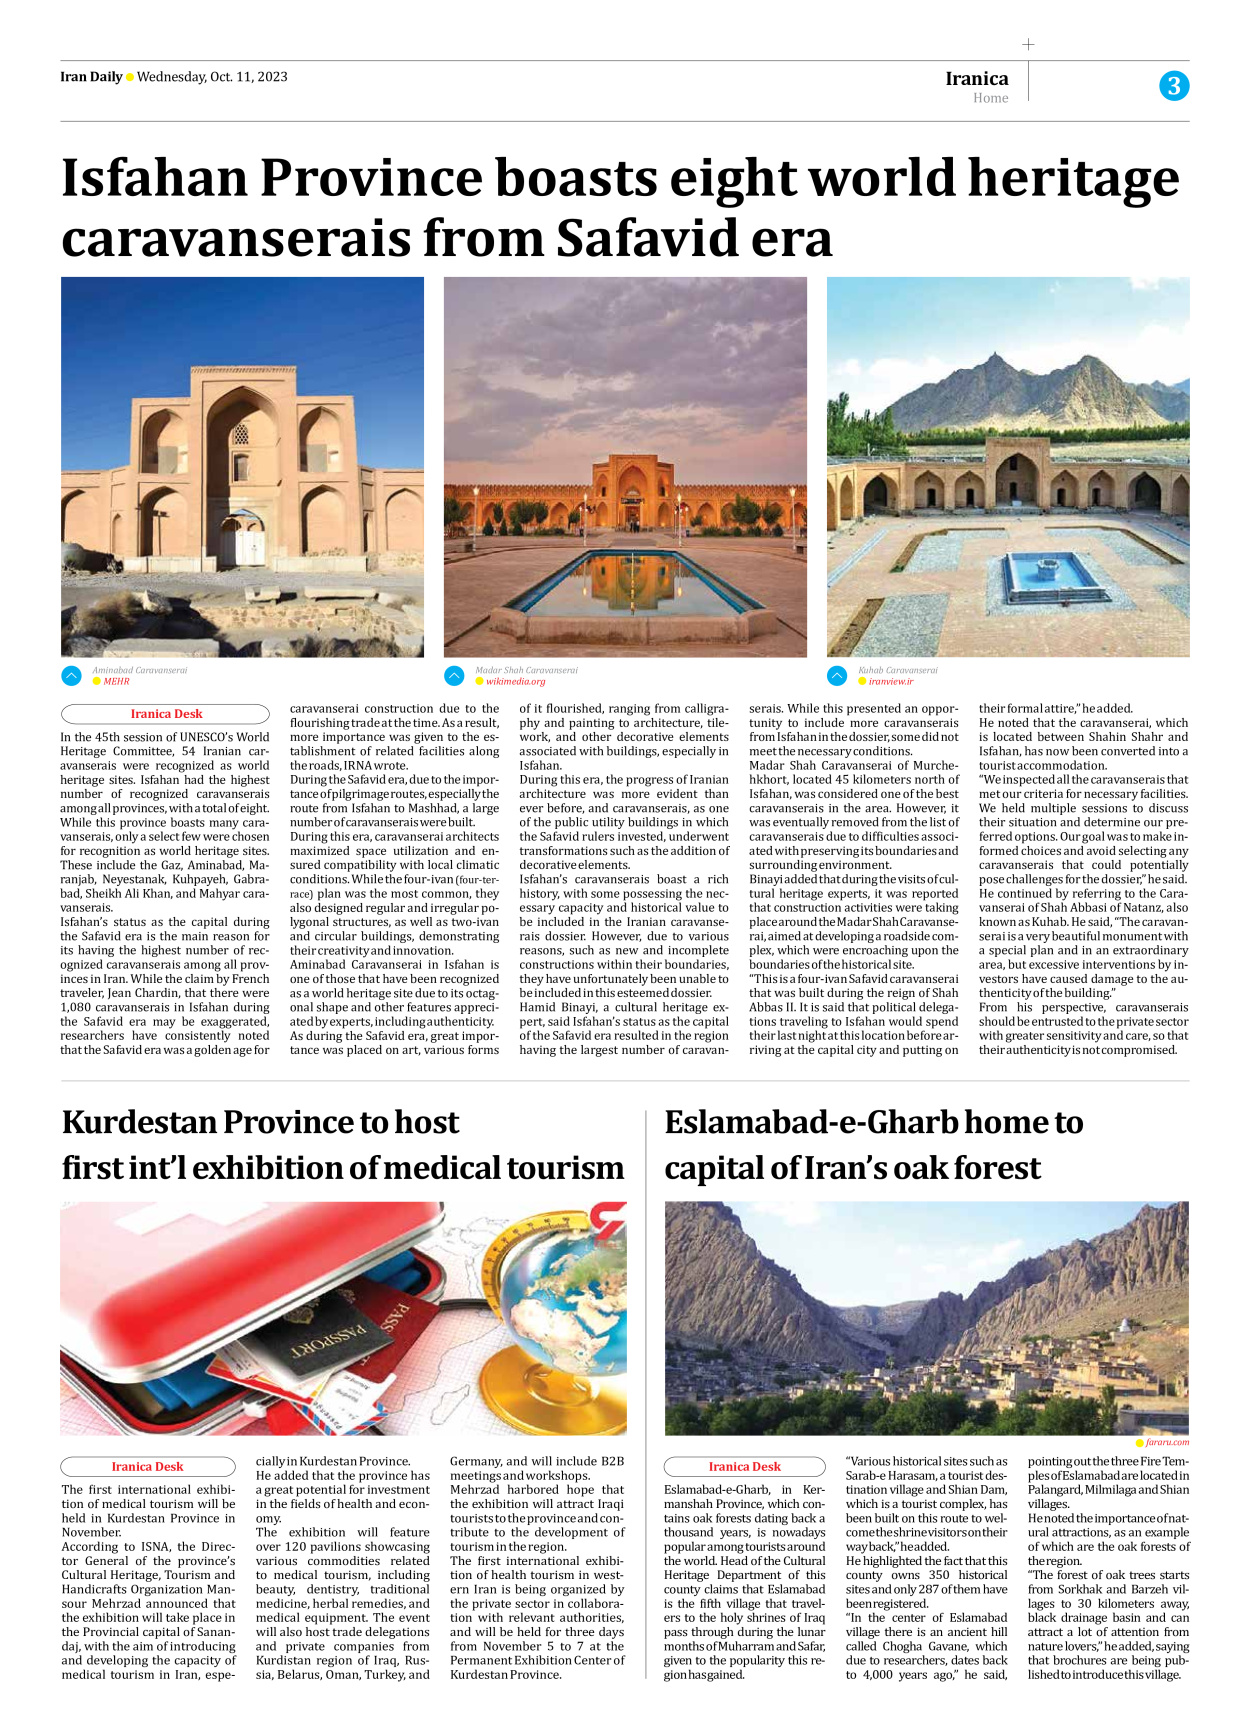 Iran Daily - Number Seven Thousand Four Hundred and Five - 11 October 2023 - Page 3